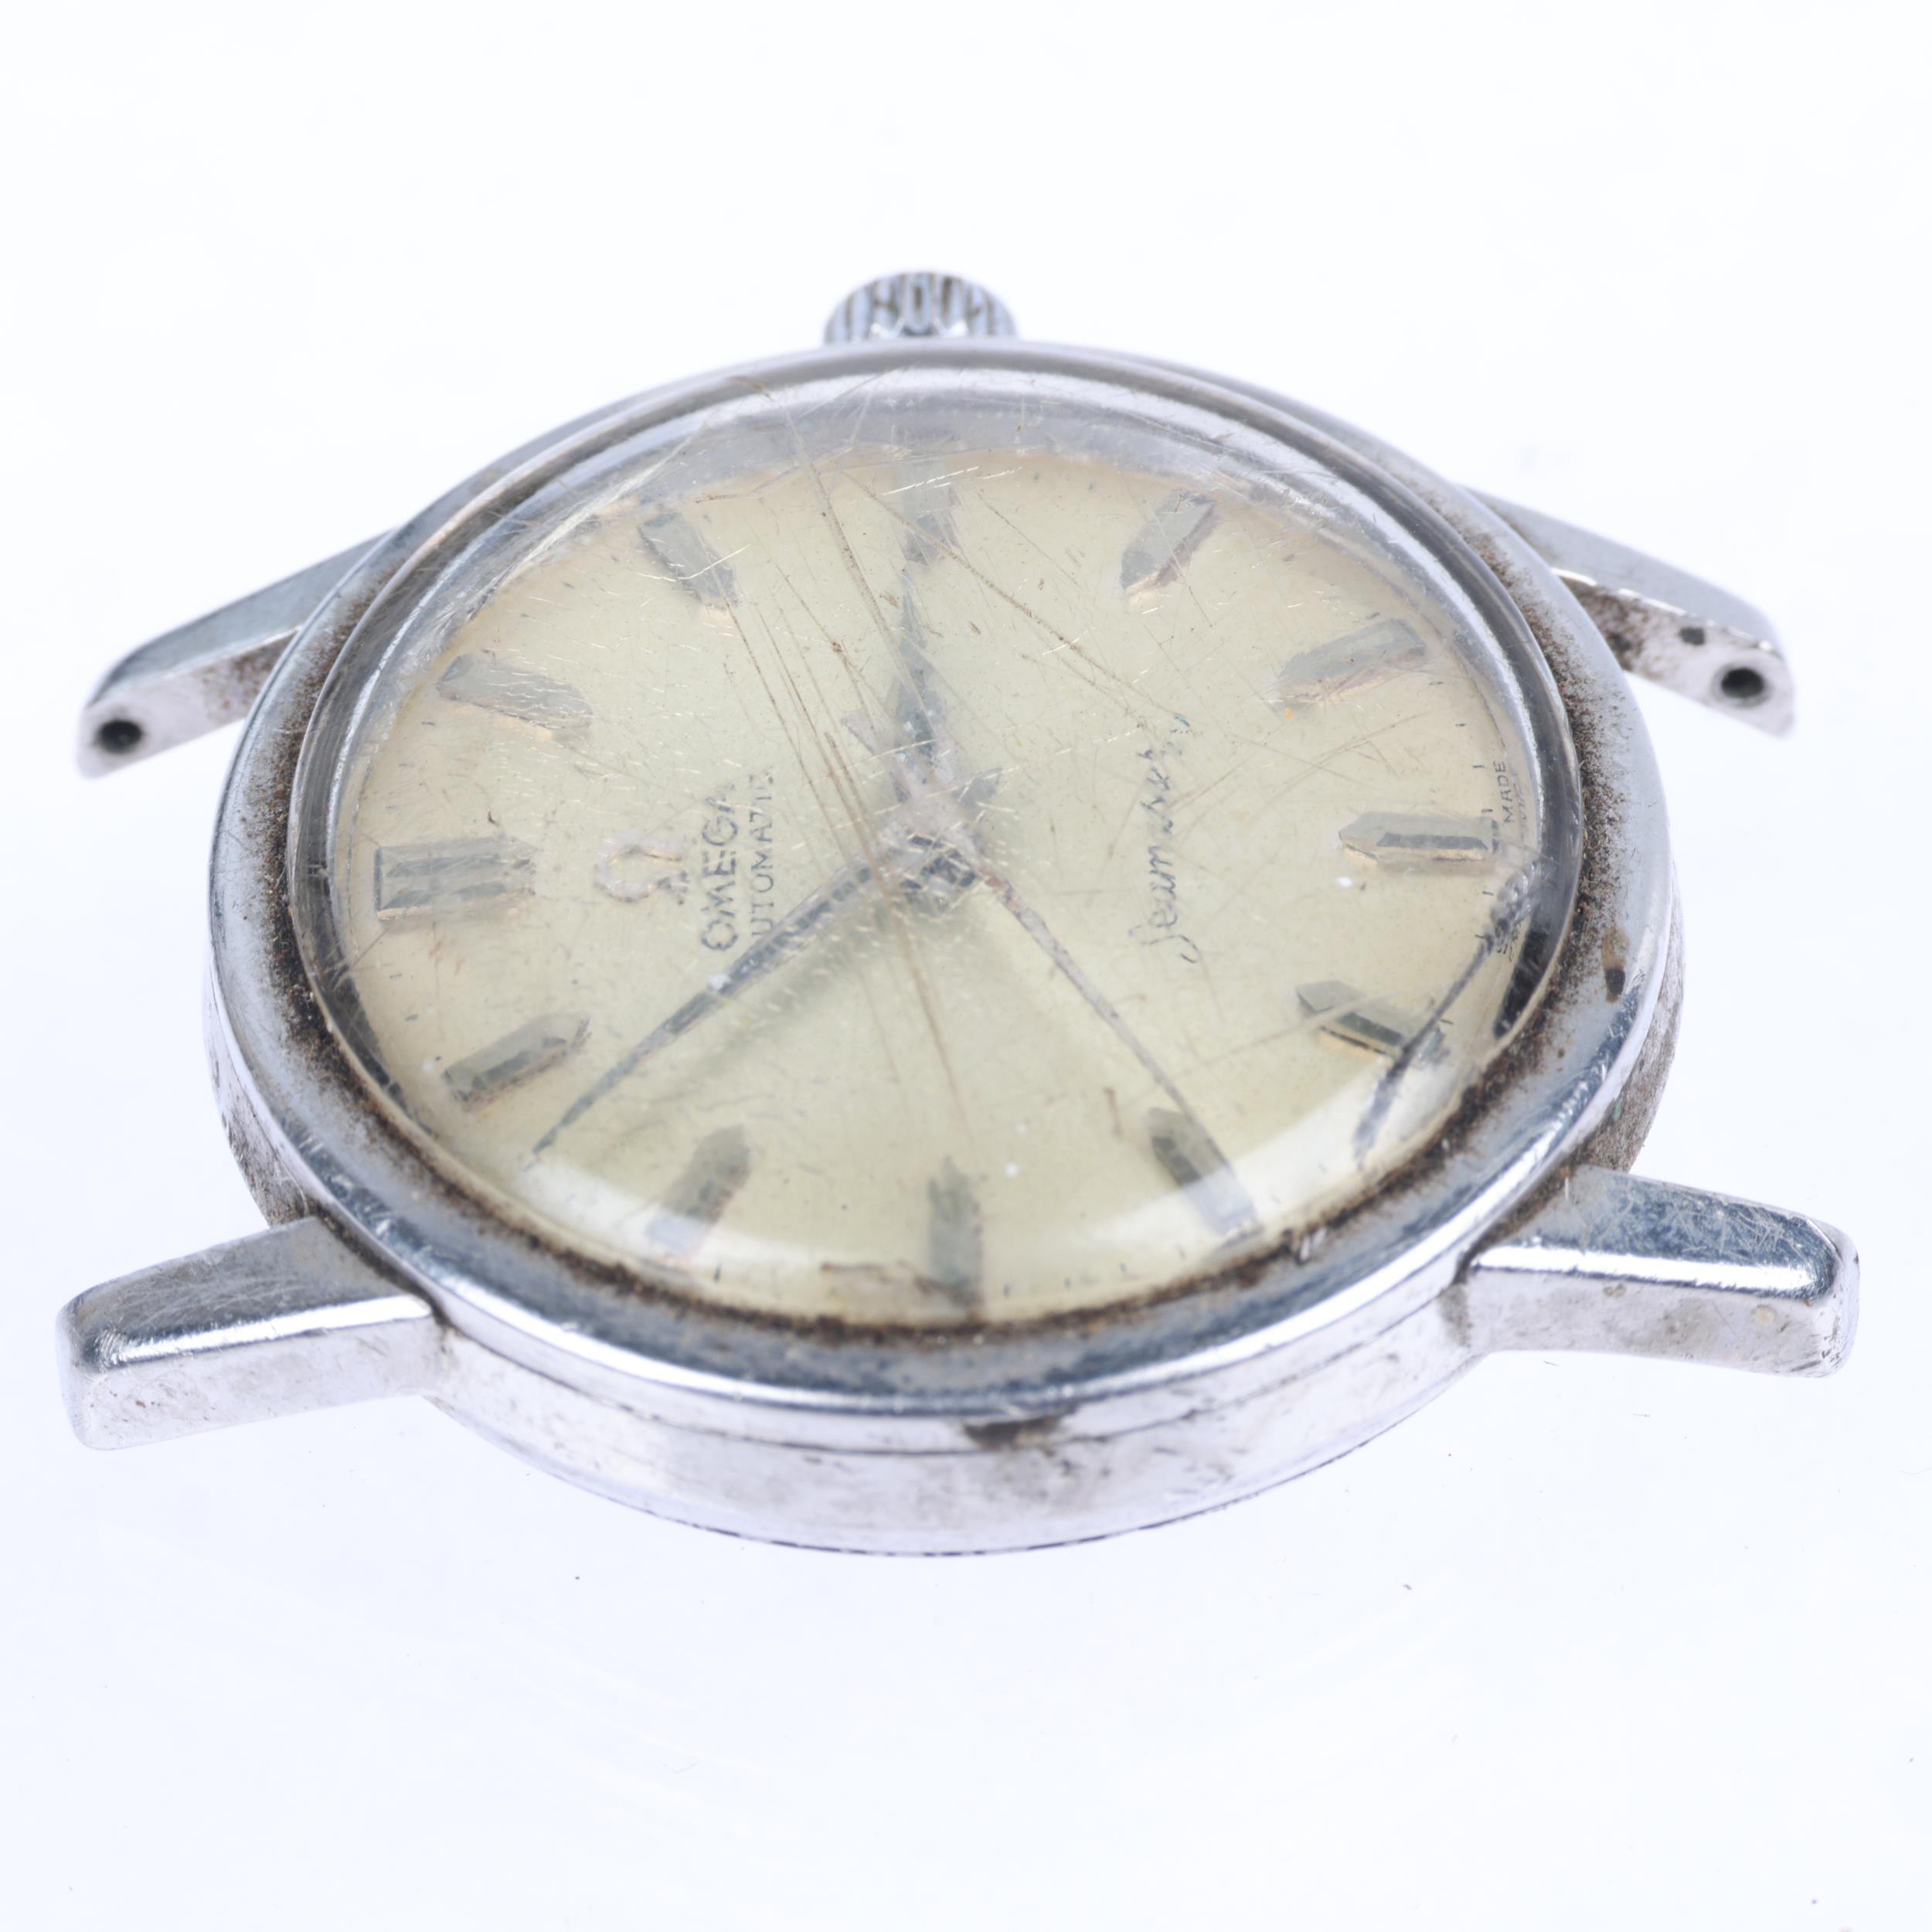 OMEGA - a stainless steel Seamaster automatic wristwatch head, ref. 14762 61 SC, circa 1960, - Image 4 of 5